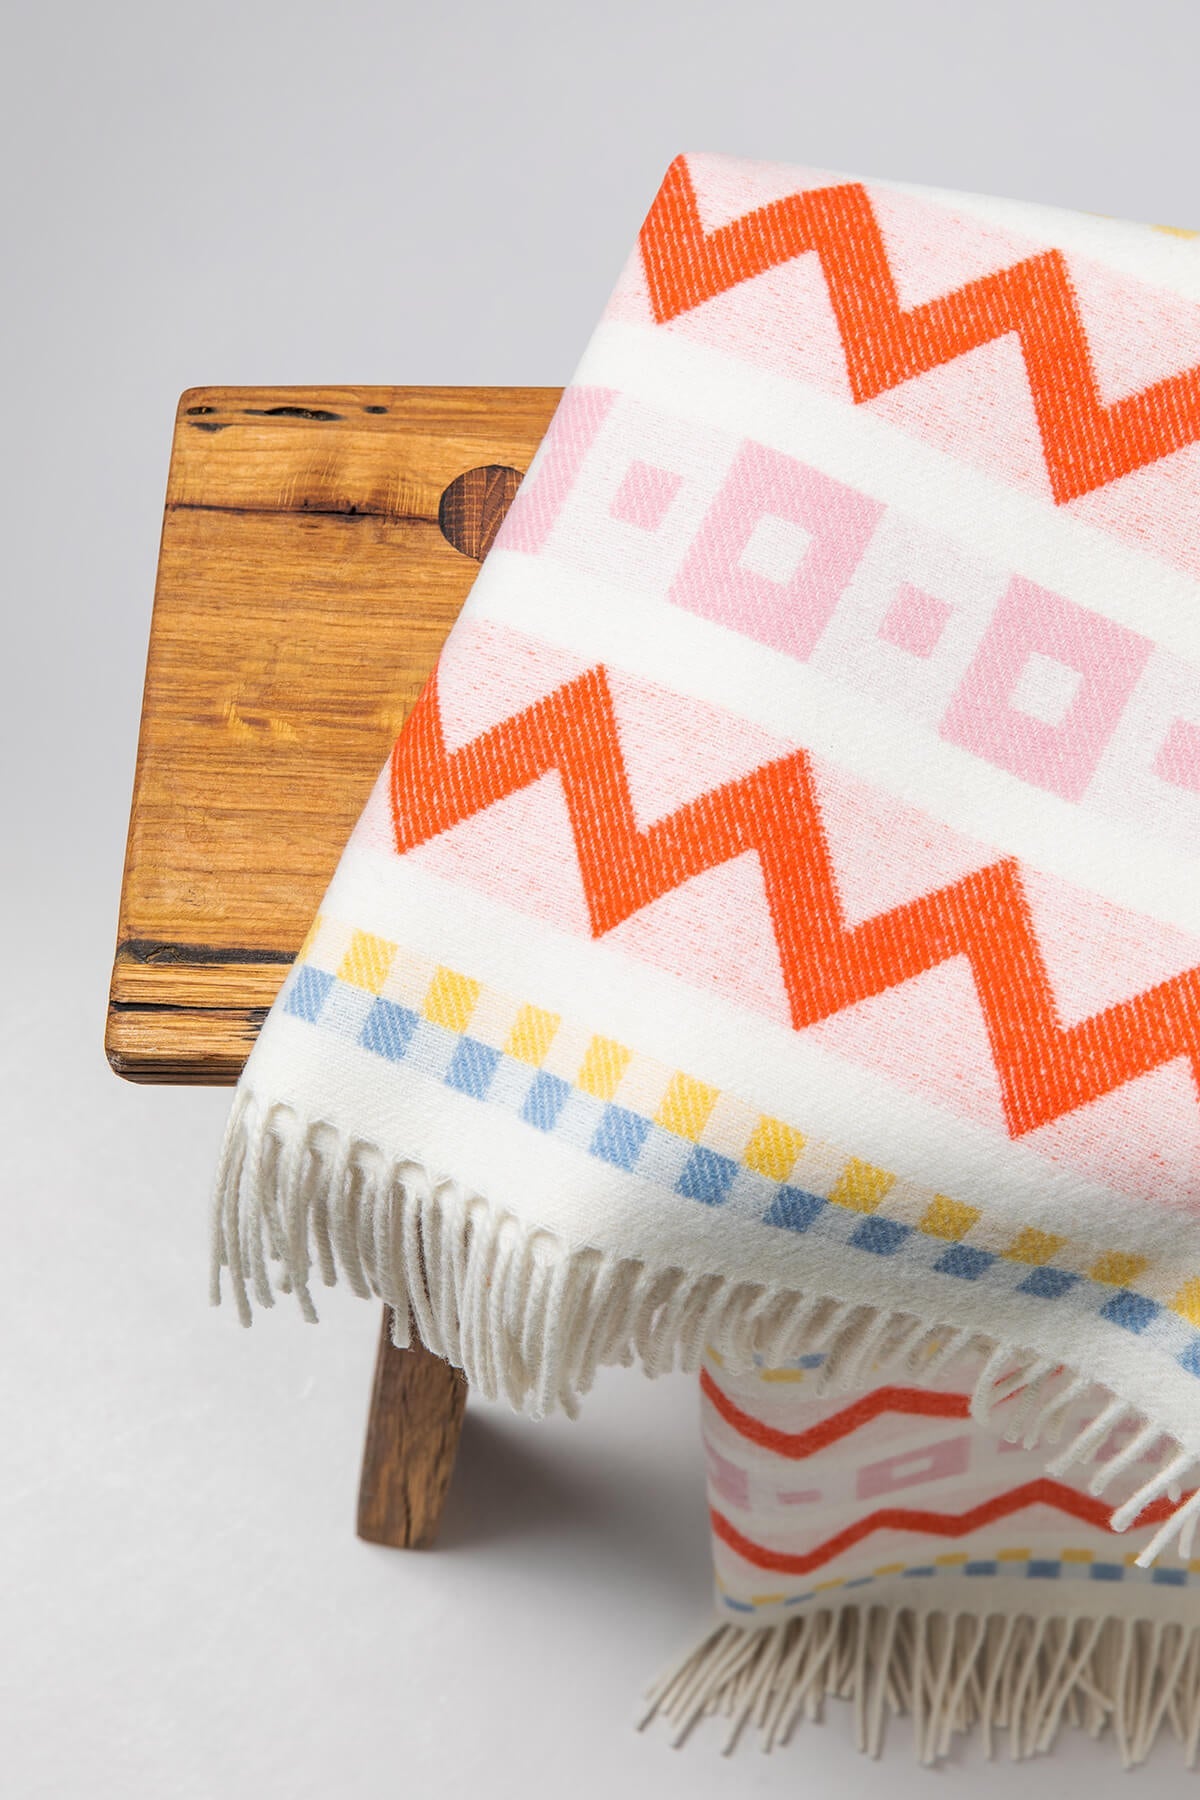  A small wooden stool with a Johnstons of Elgin Children's Zig Zag Blanket in shades of pink, orange, and cream on a soft grey background. WB002334RU7277ONE